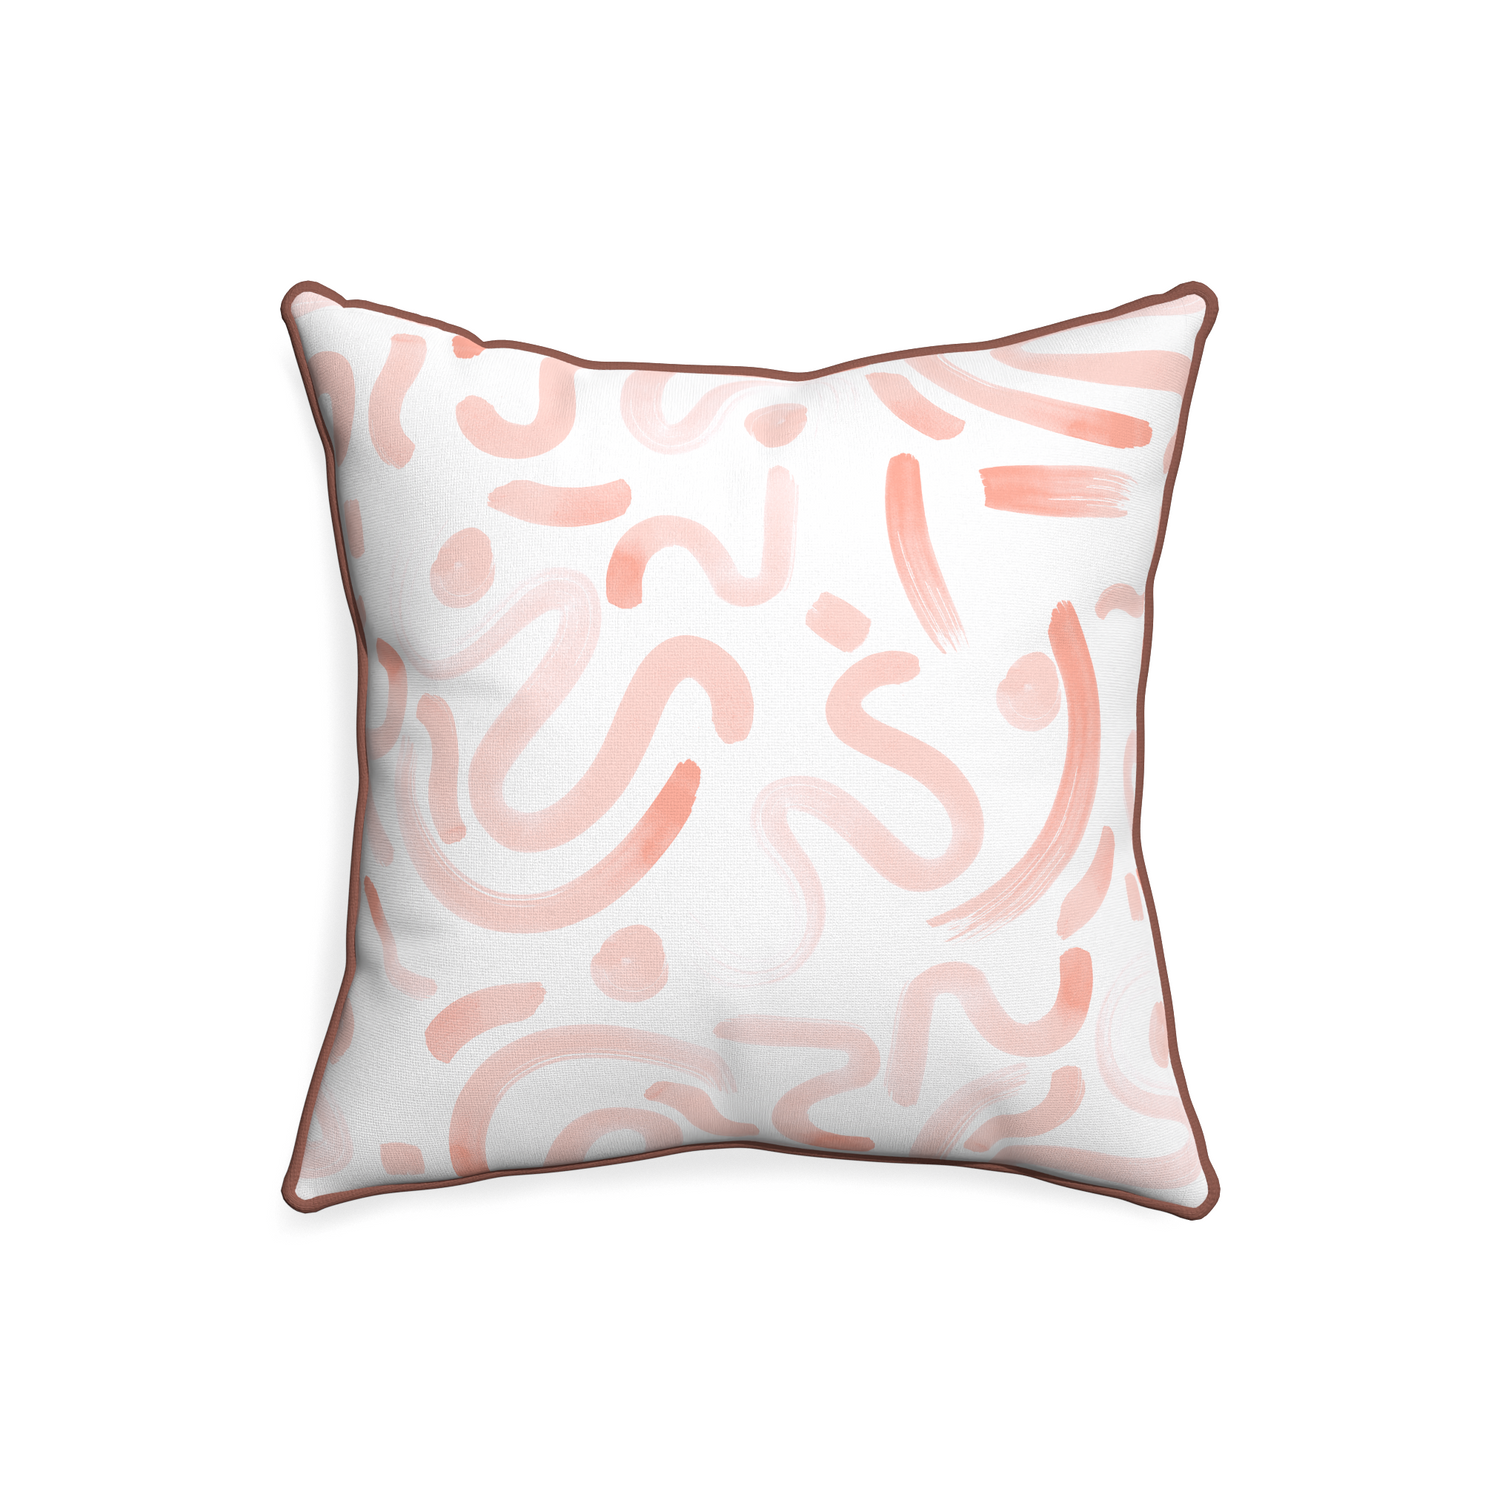 20-square hockney pink custom pink graphicpillow with w piping on white background